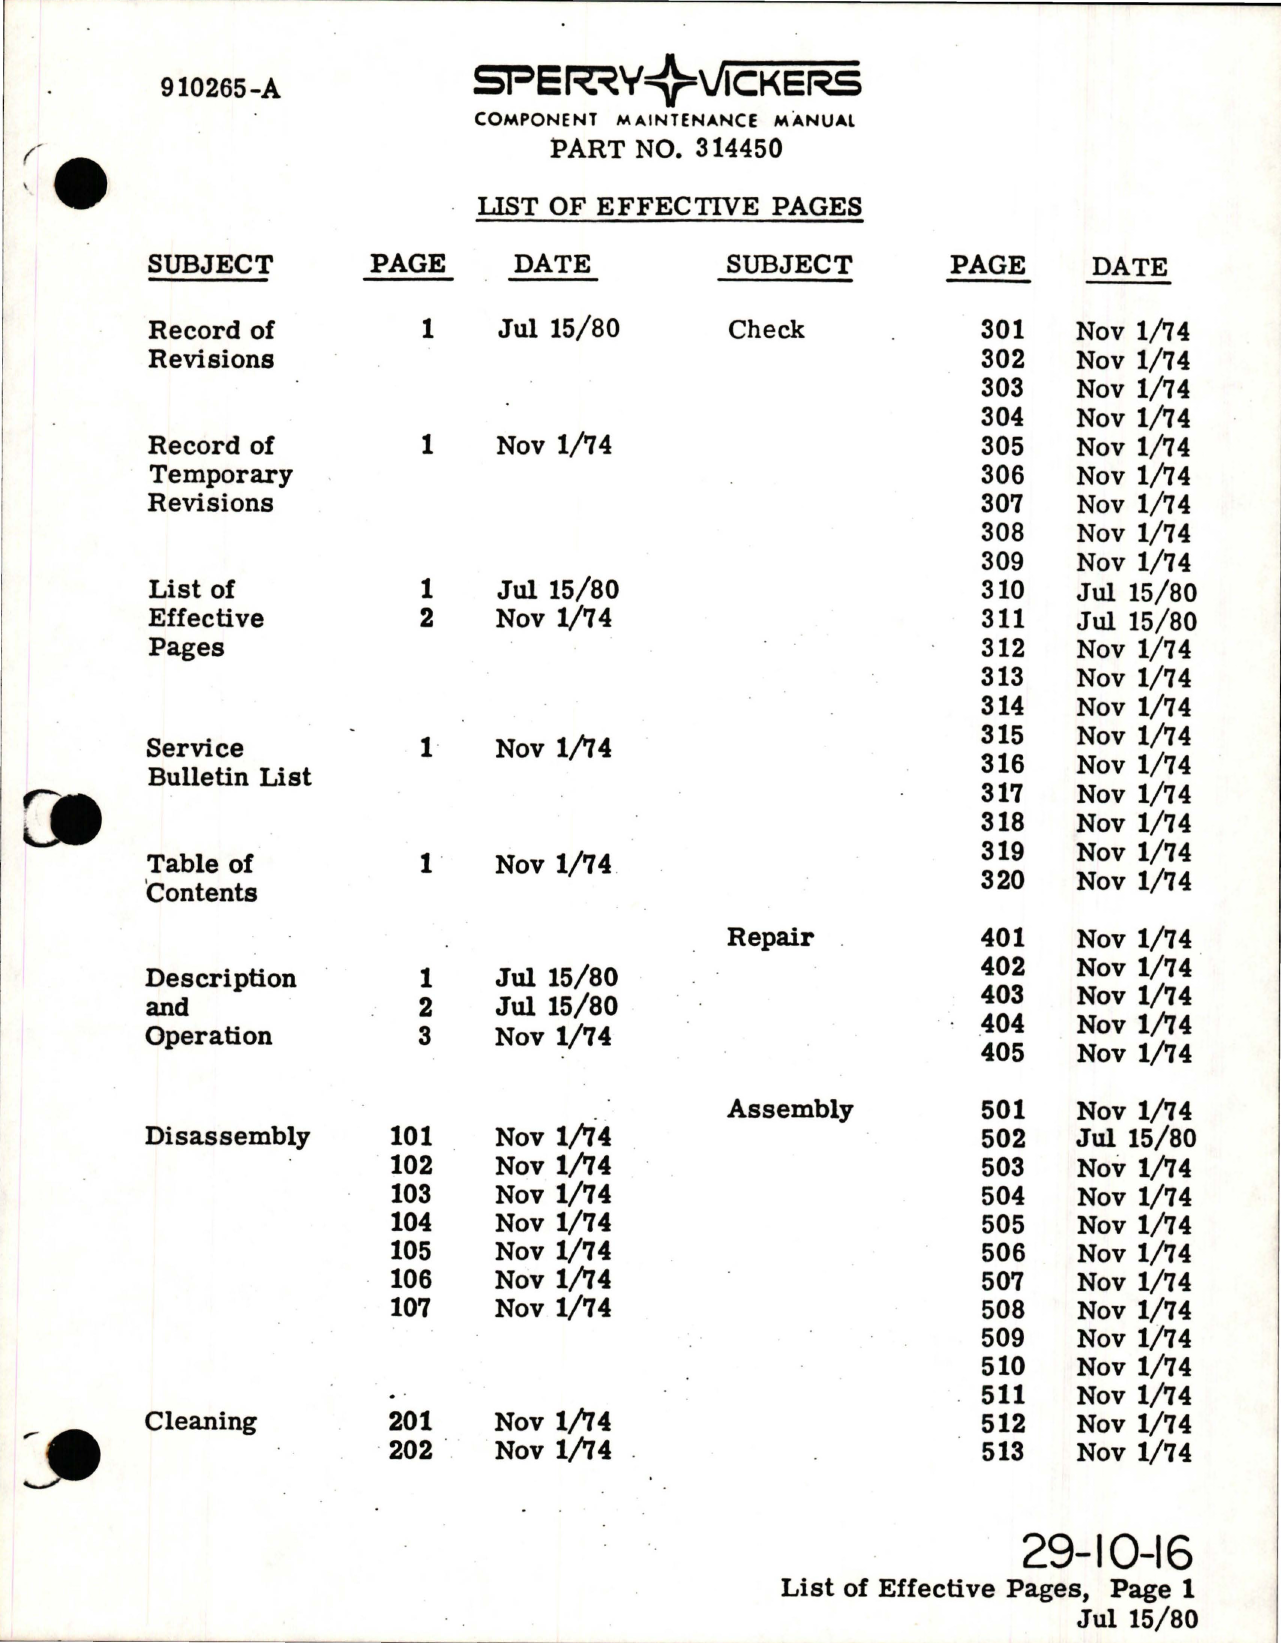 Sample page 7 from AirCorps Library document: Maintenance with Illustrated Parts List for Variable Displacement Hydraulic Pump Subassembly - Part 314450 - Model PVB-022-1